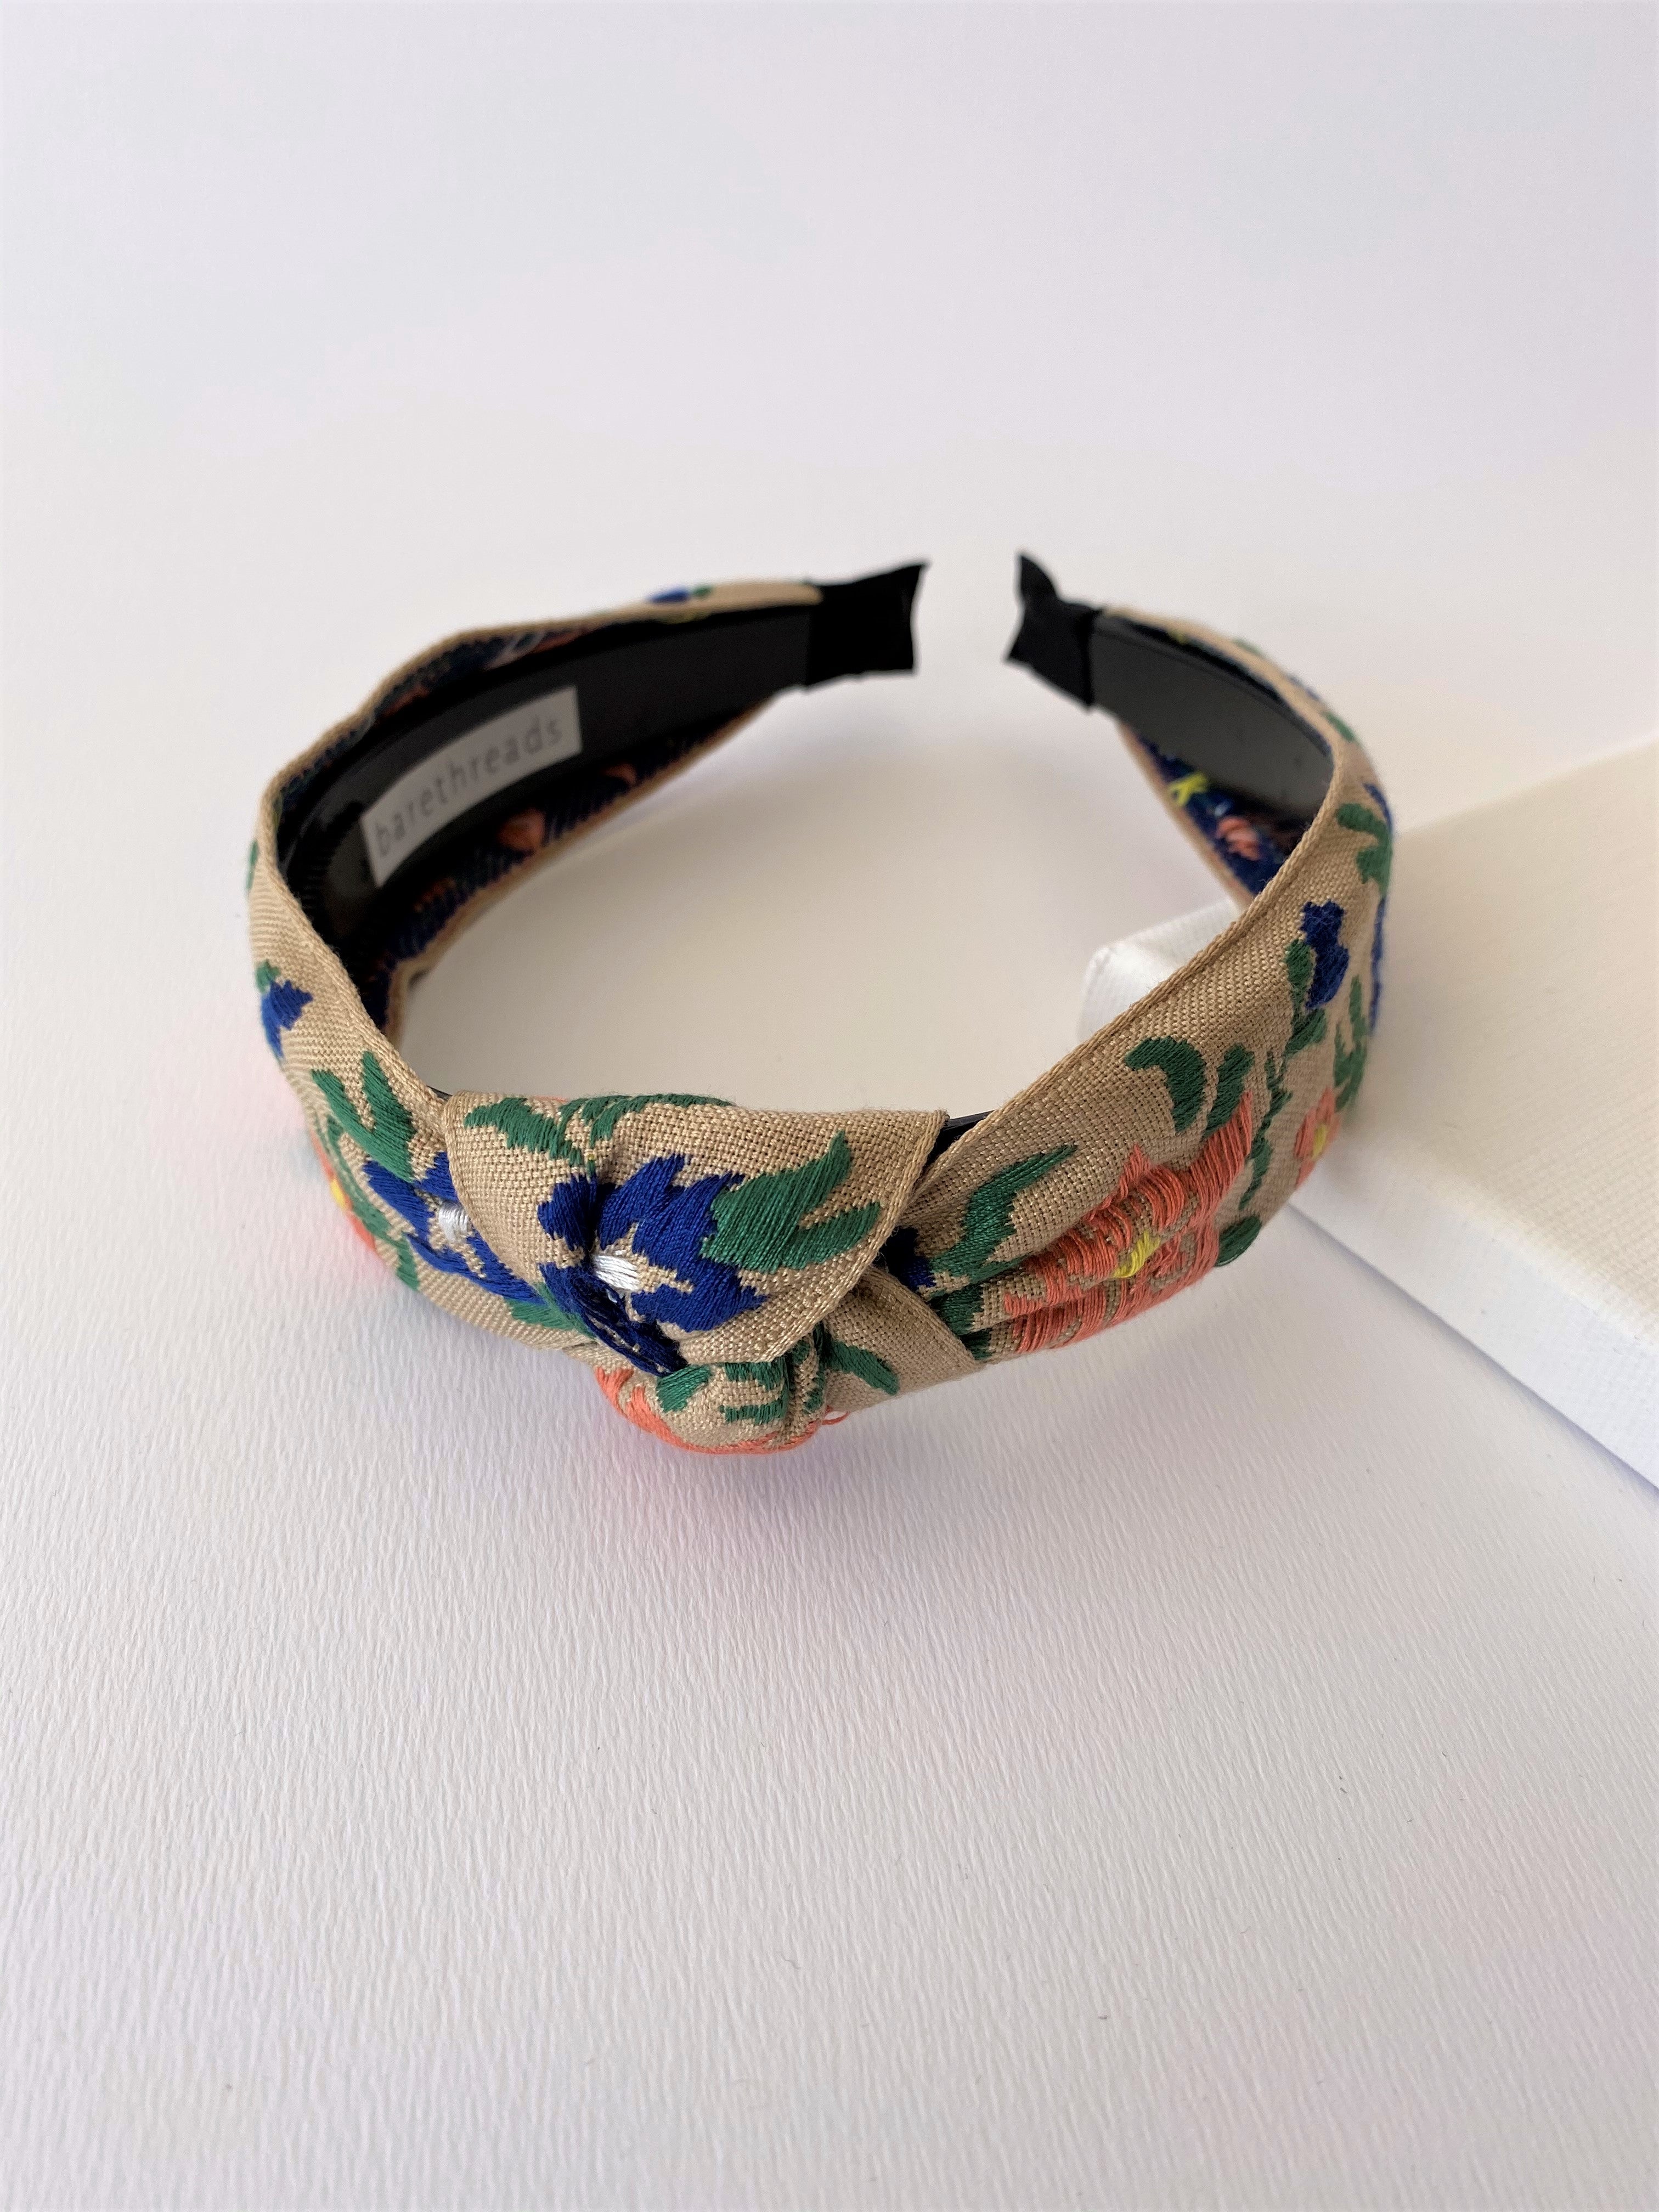 THE MIDSUMMER NIGHT EMBROIDERED BAND